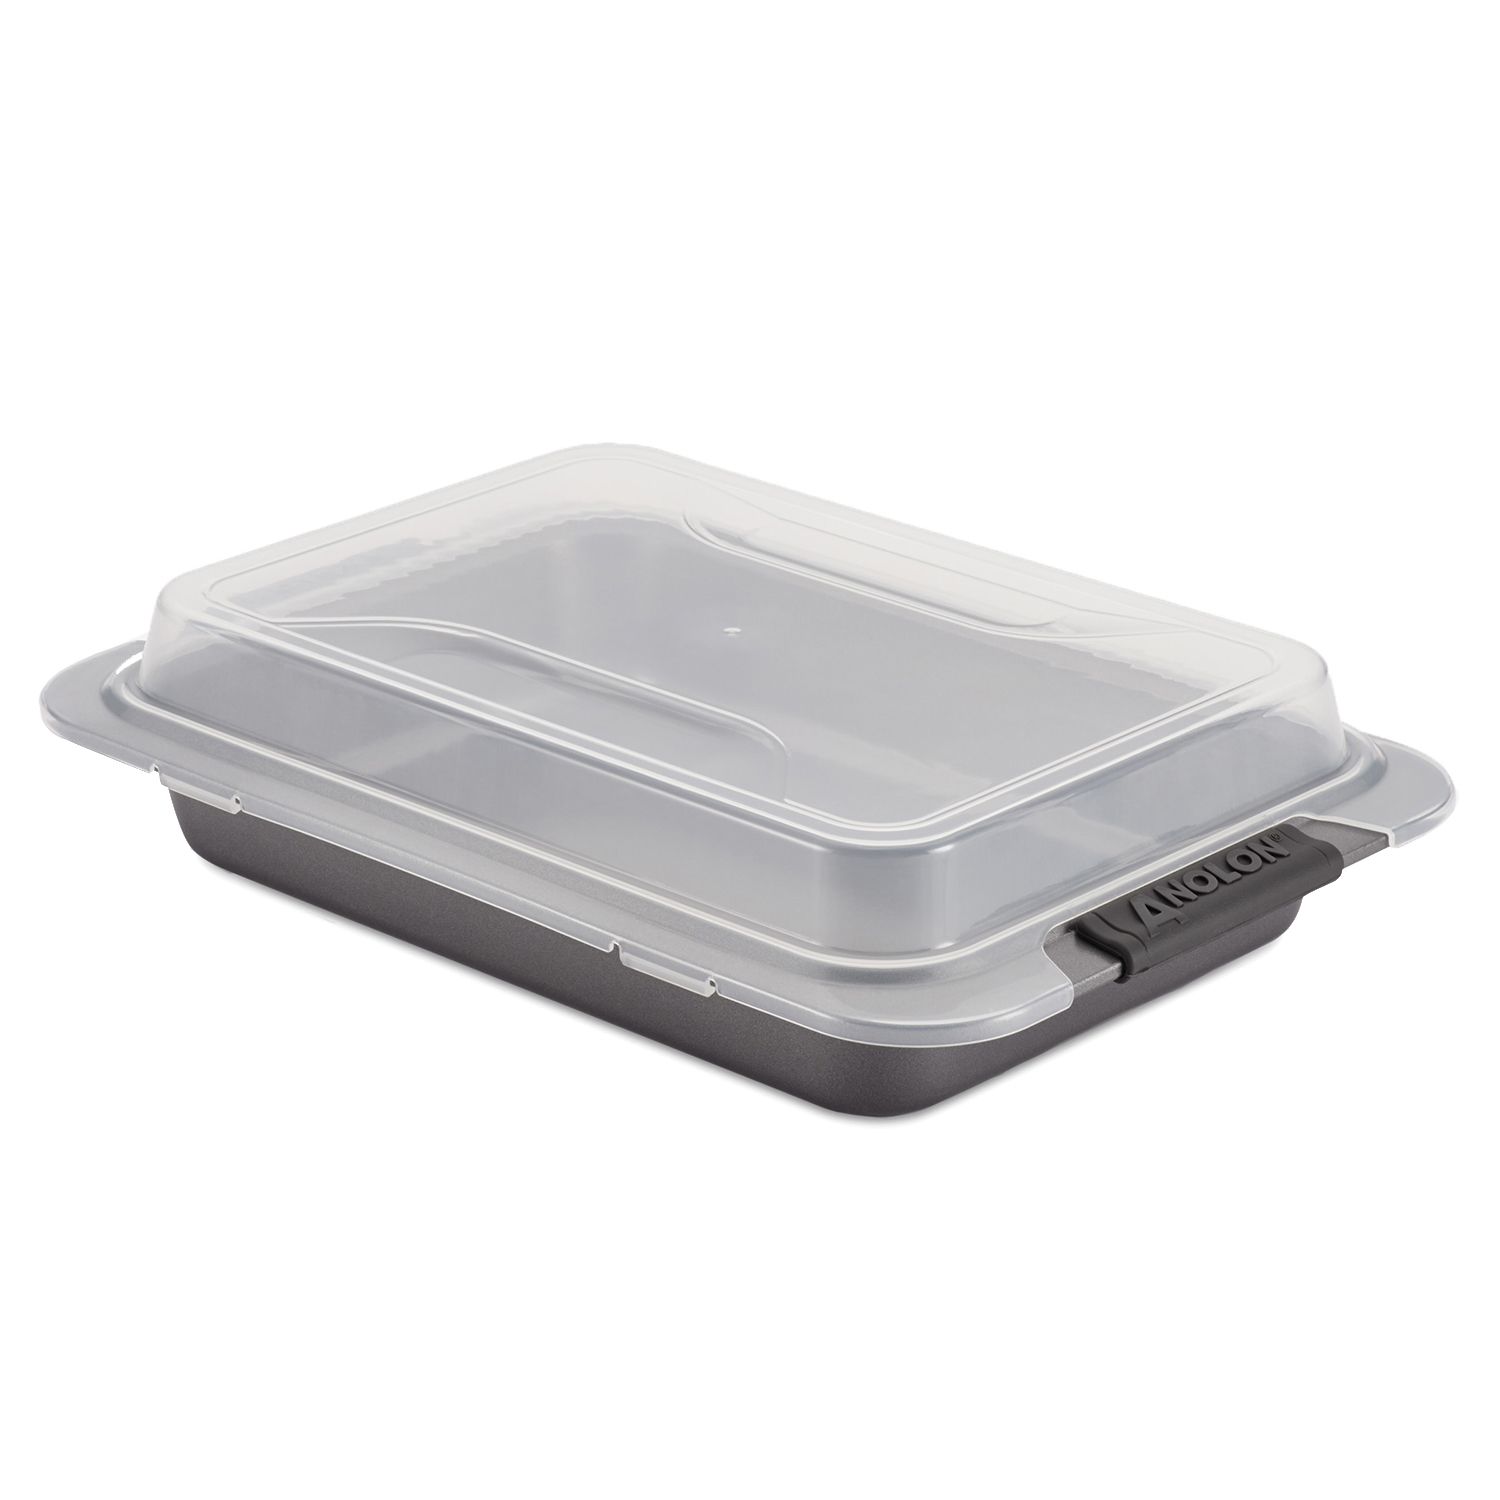 Taste Of Home Baking Pan, Non-Stick, Spring Form, 9-Inch